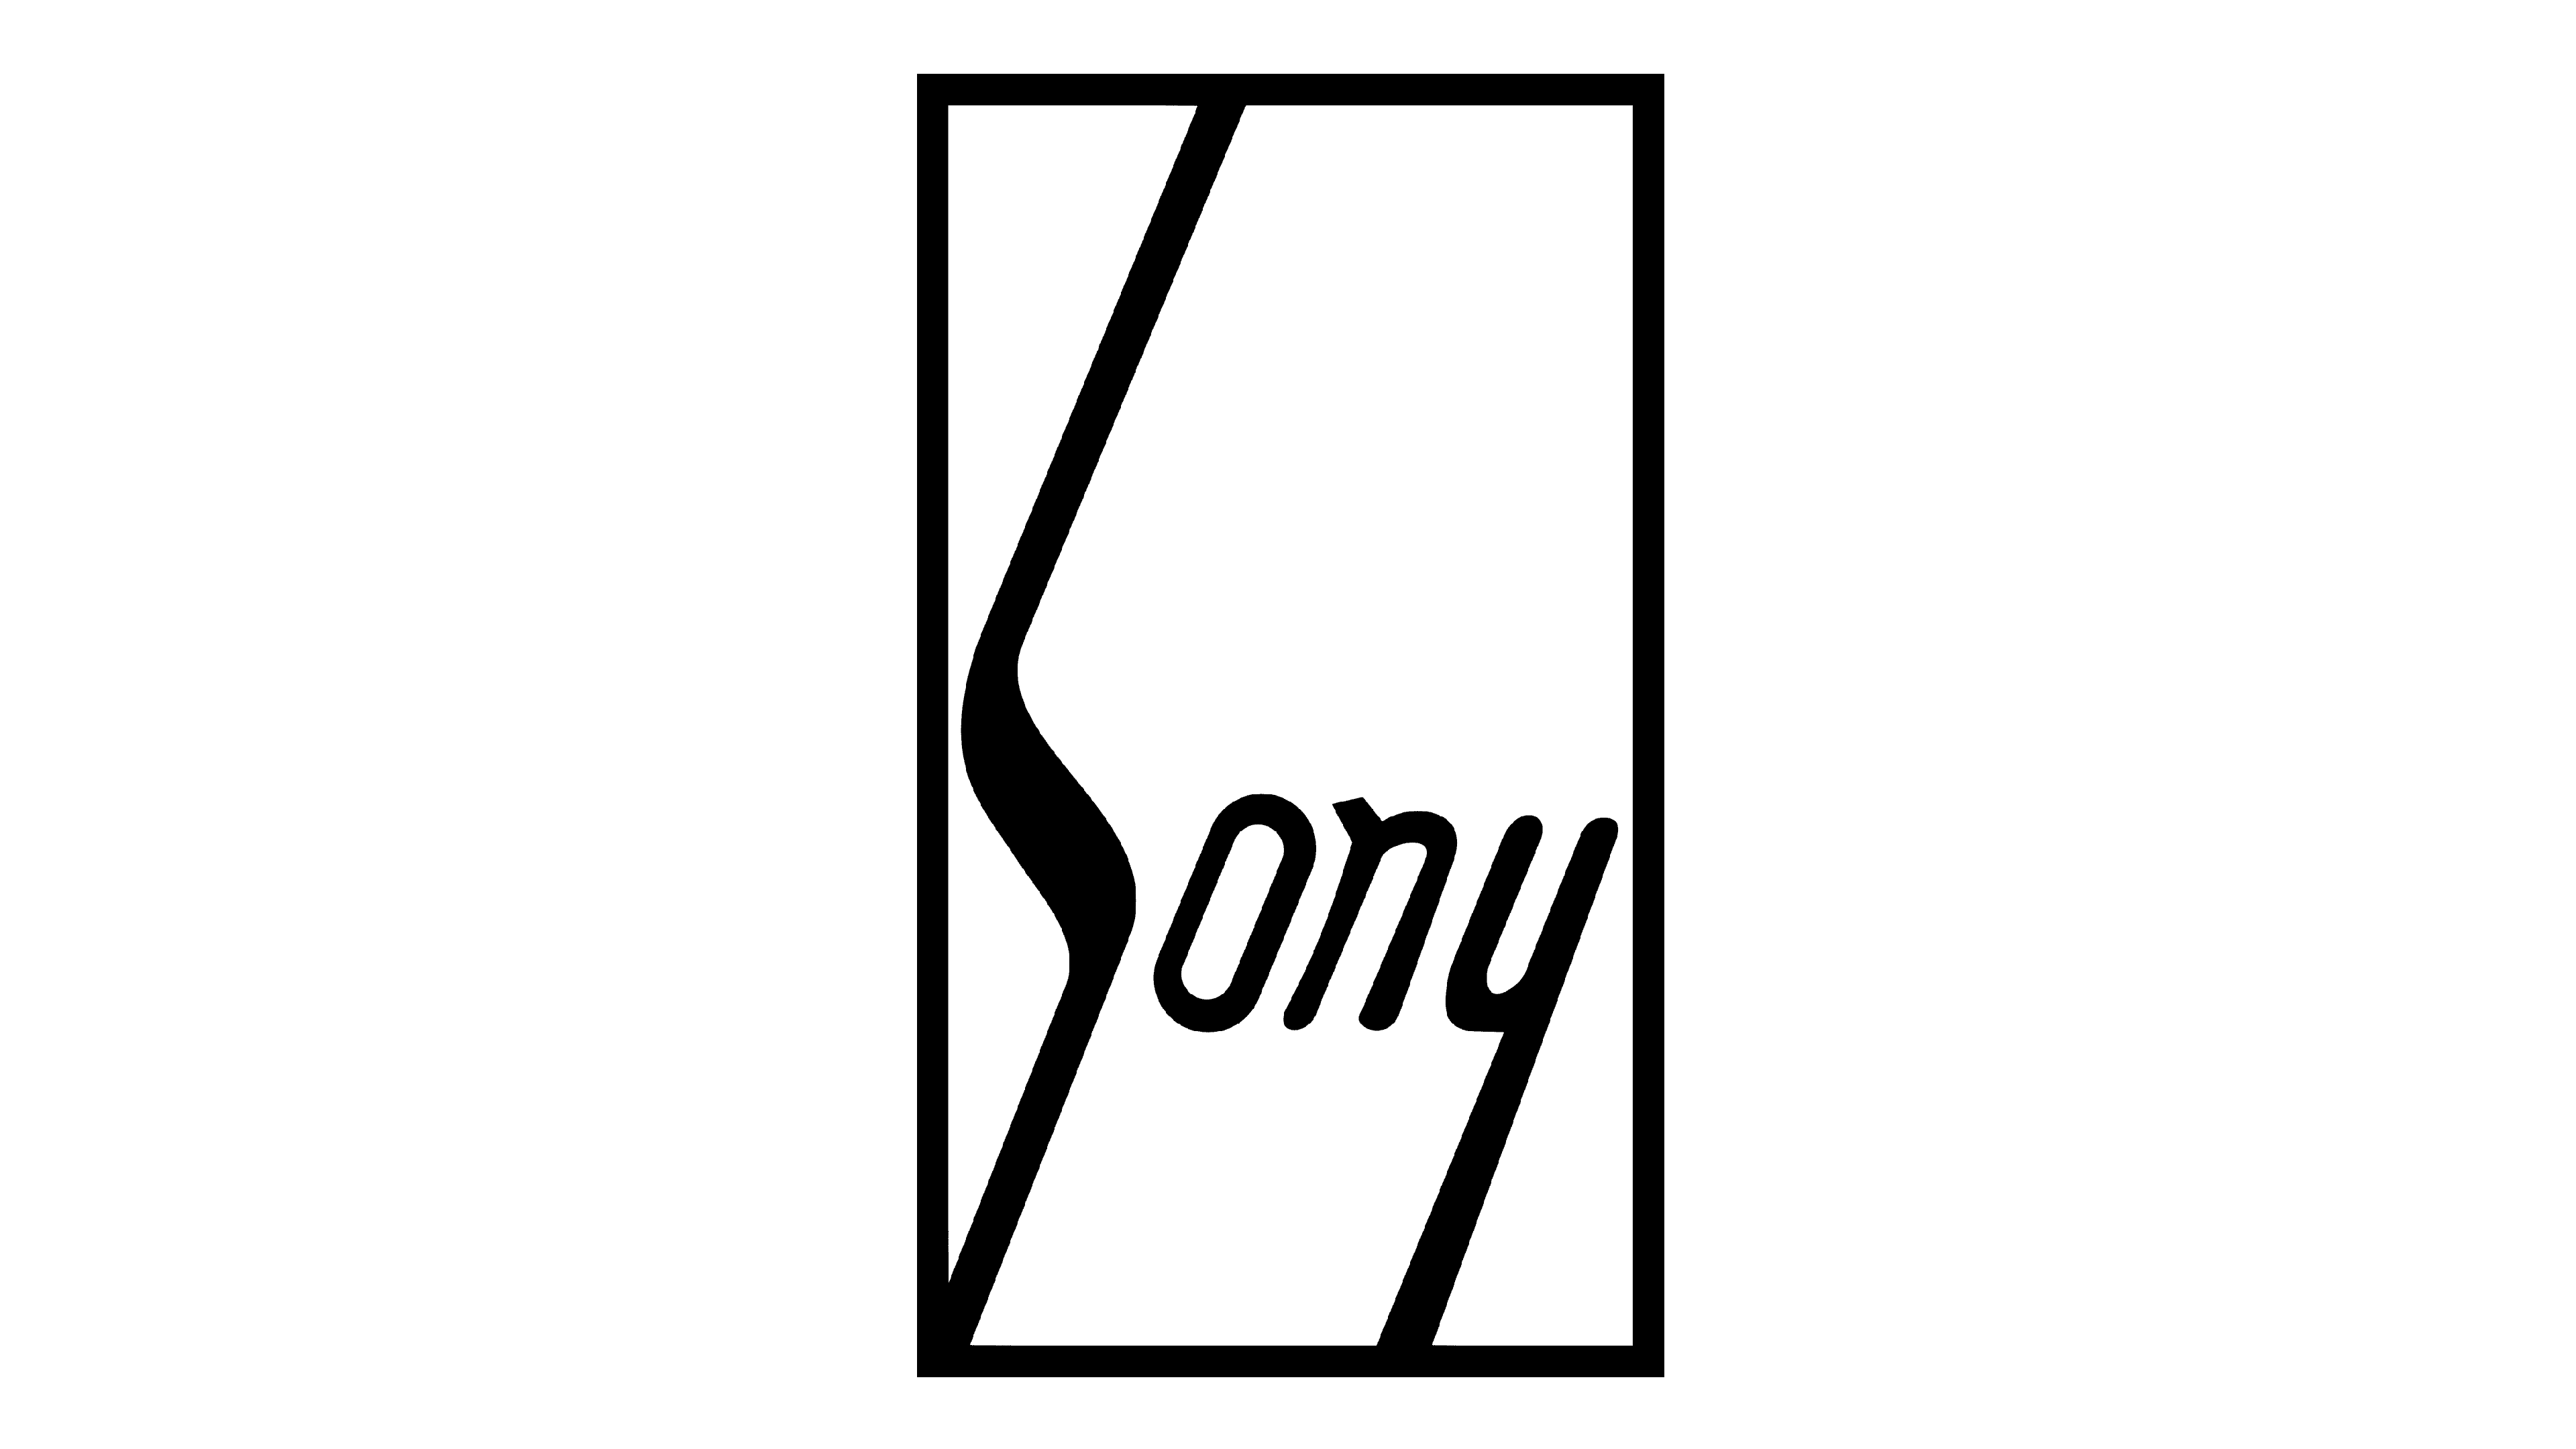 Sony Logo and symbol, meaning, history, PNG, brand